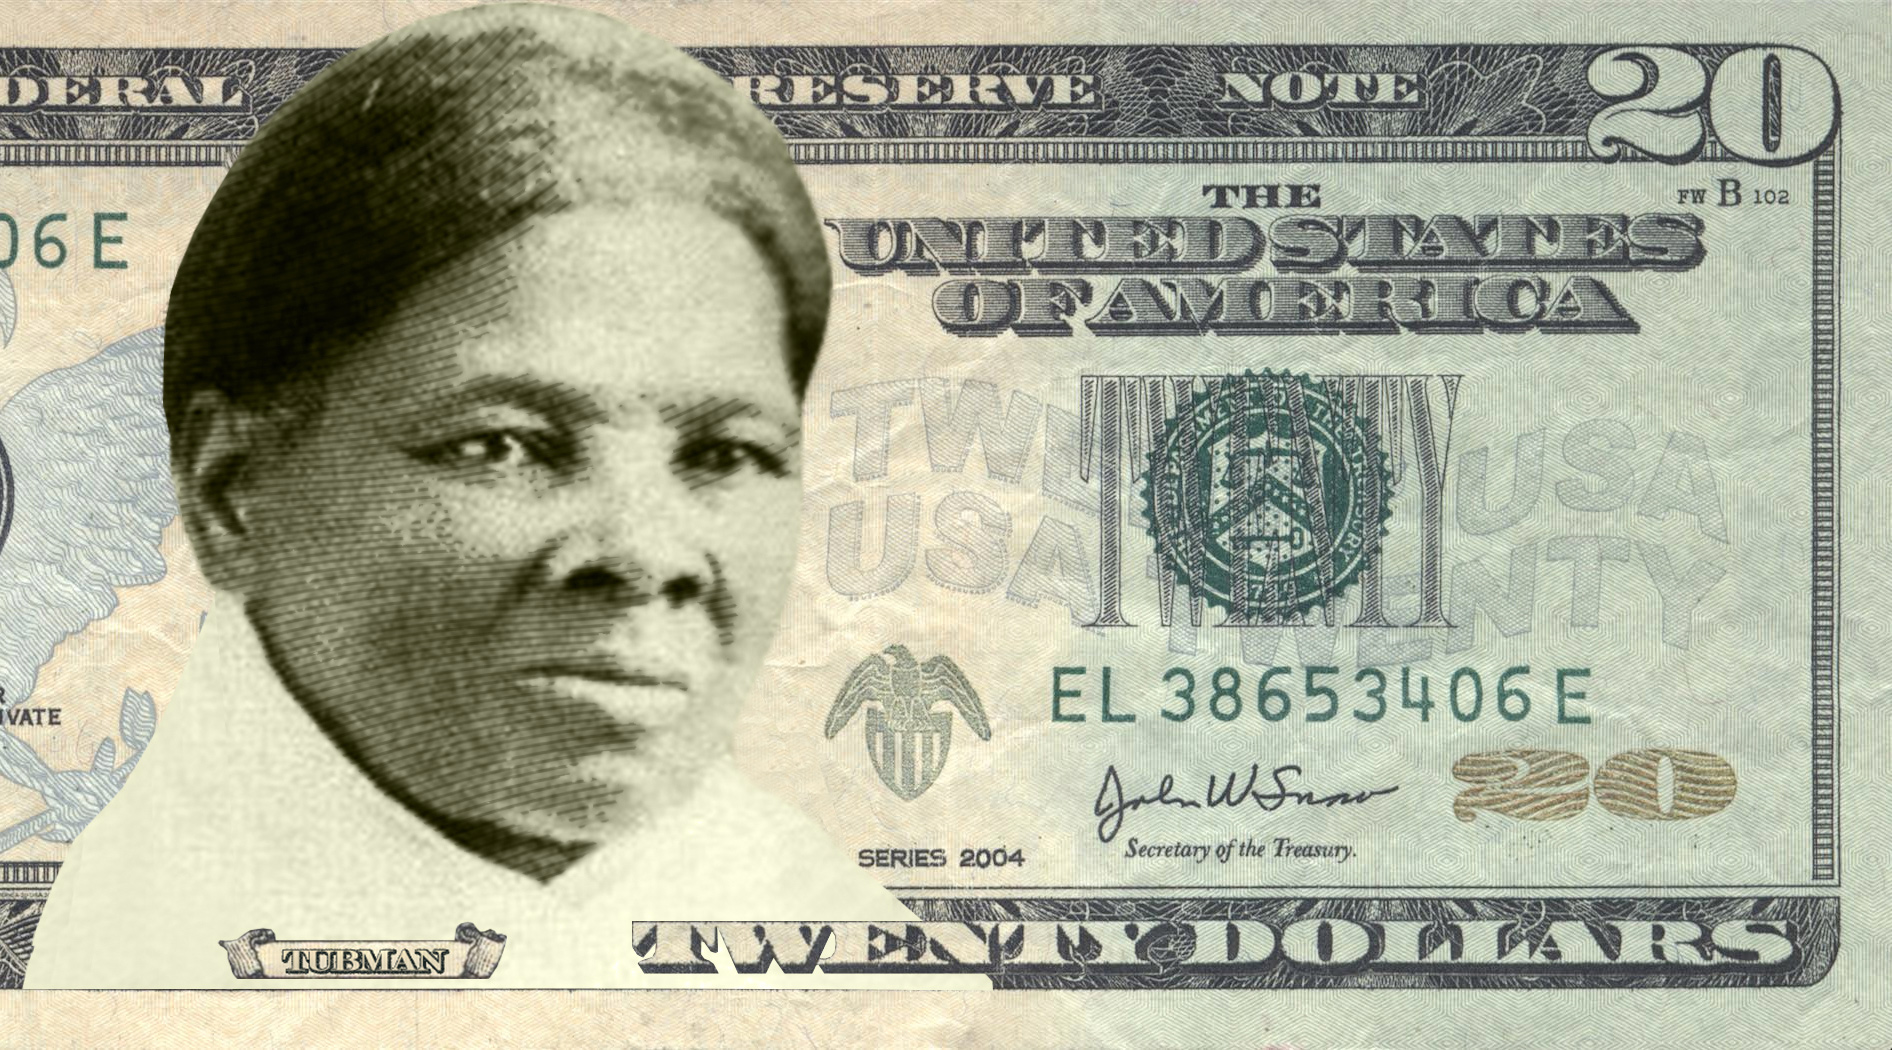 Why a woman should be on the $20 bill-—commentary